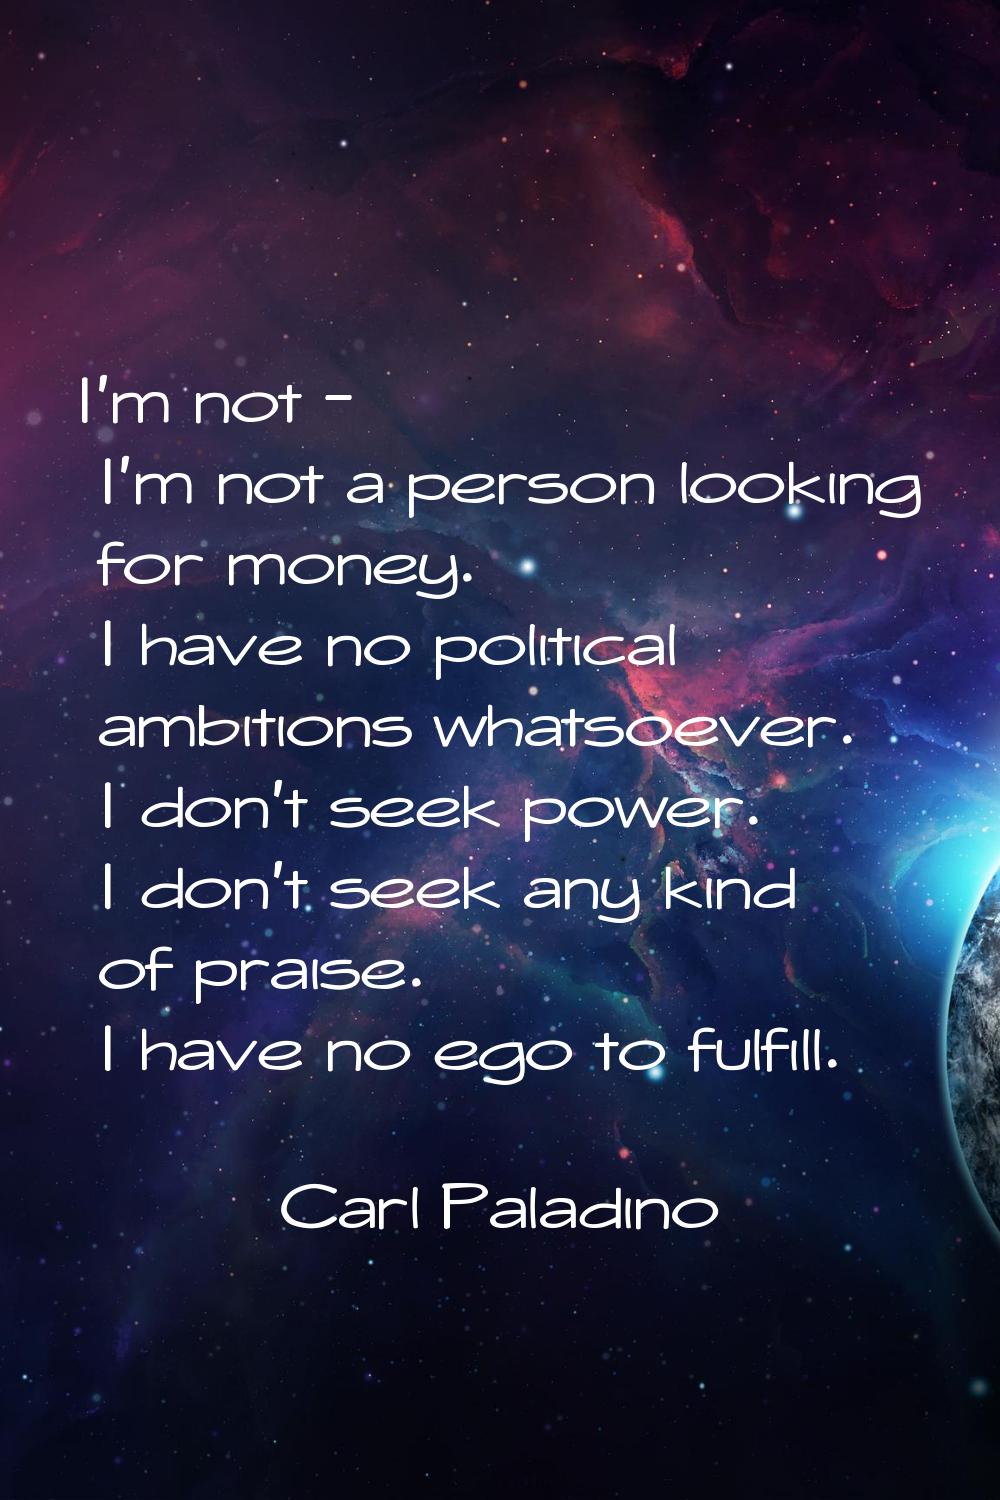 I'm not - I'm not a person looking for money. I have no political ambitions whatsoever. I don't see